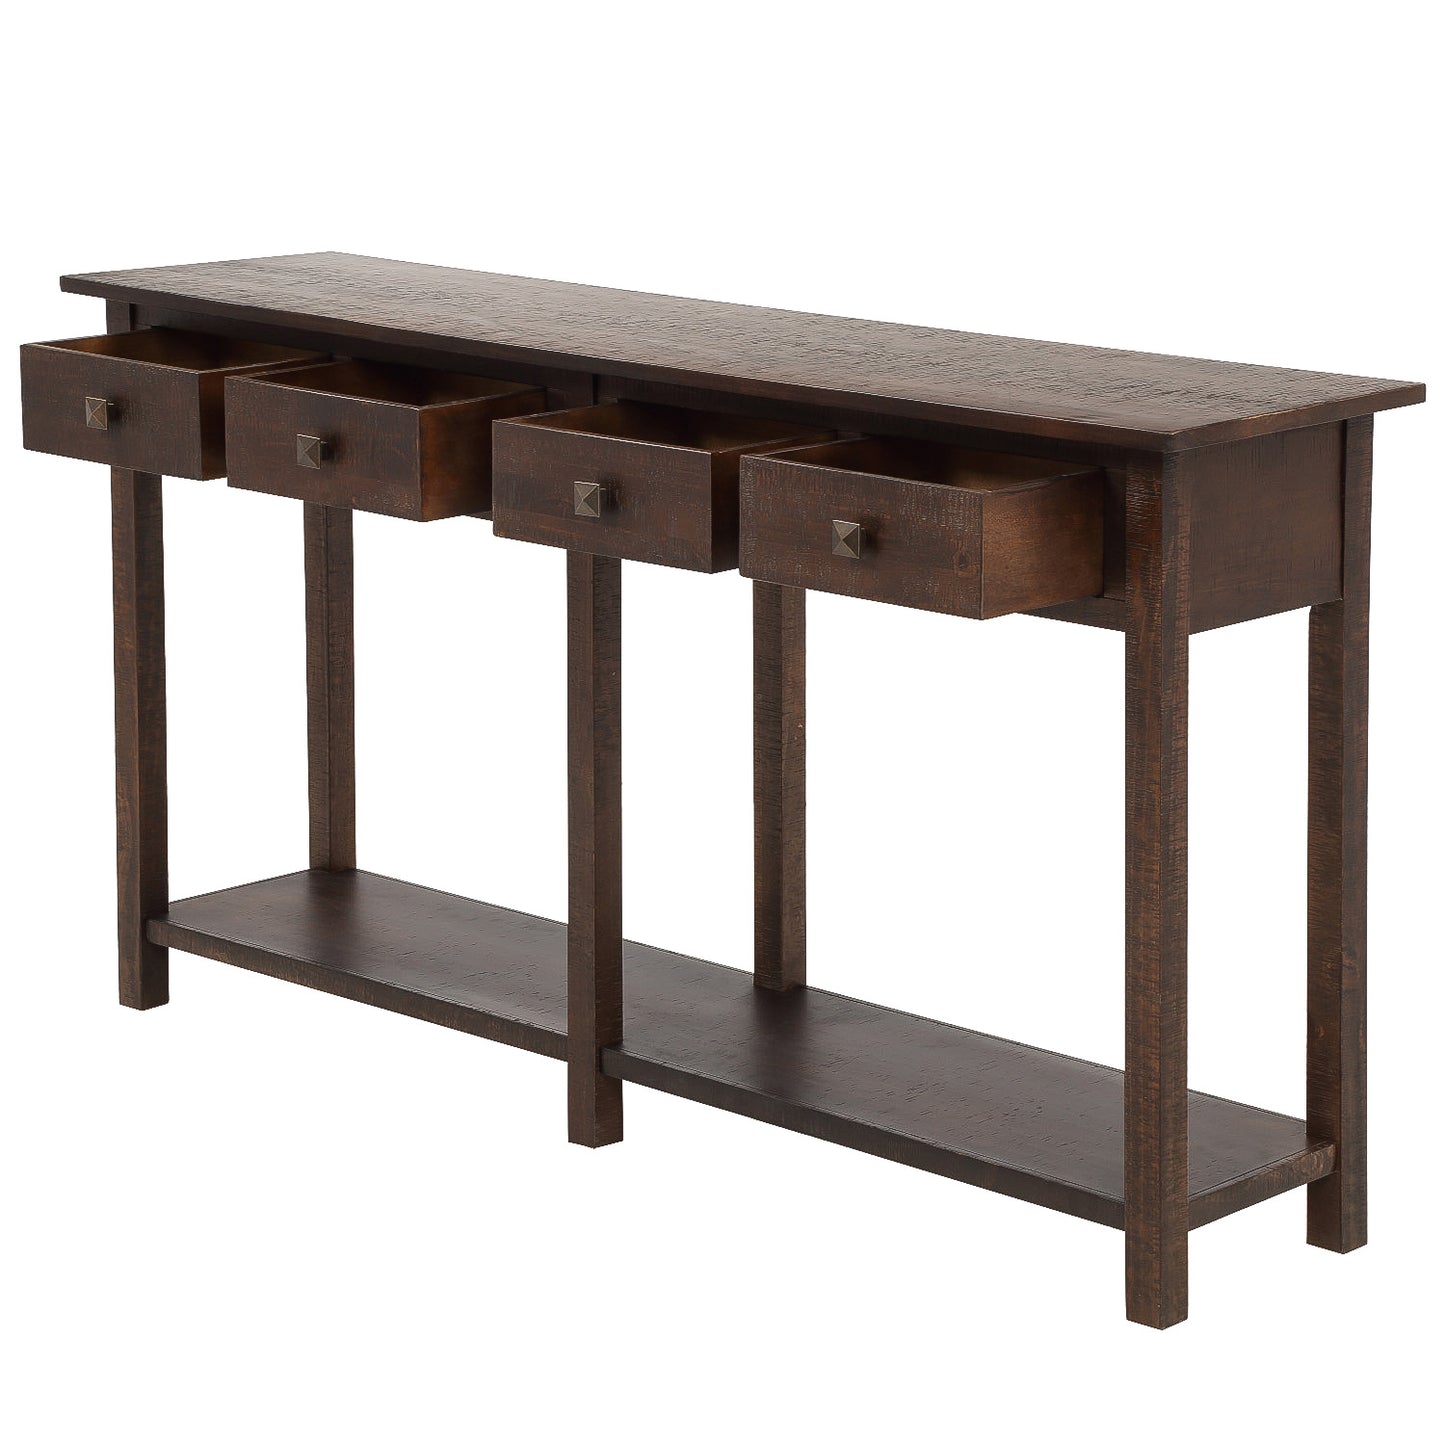 Rustic Brushed Texture Entryway Table Console Table with Drawer and Bottom Shelf for Living Room (Espresso)